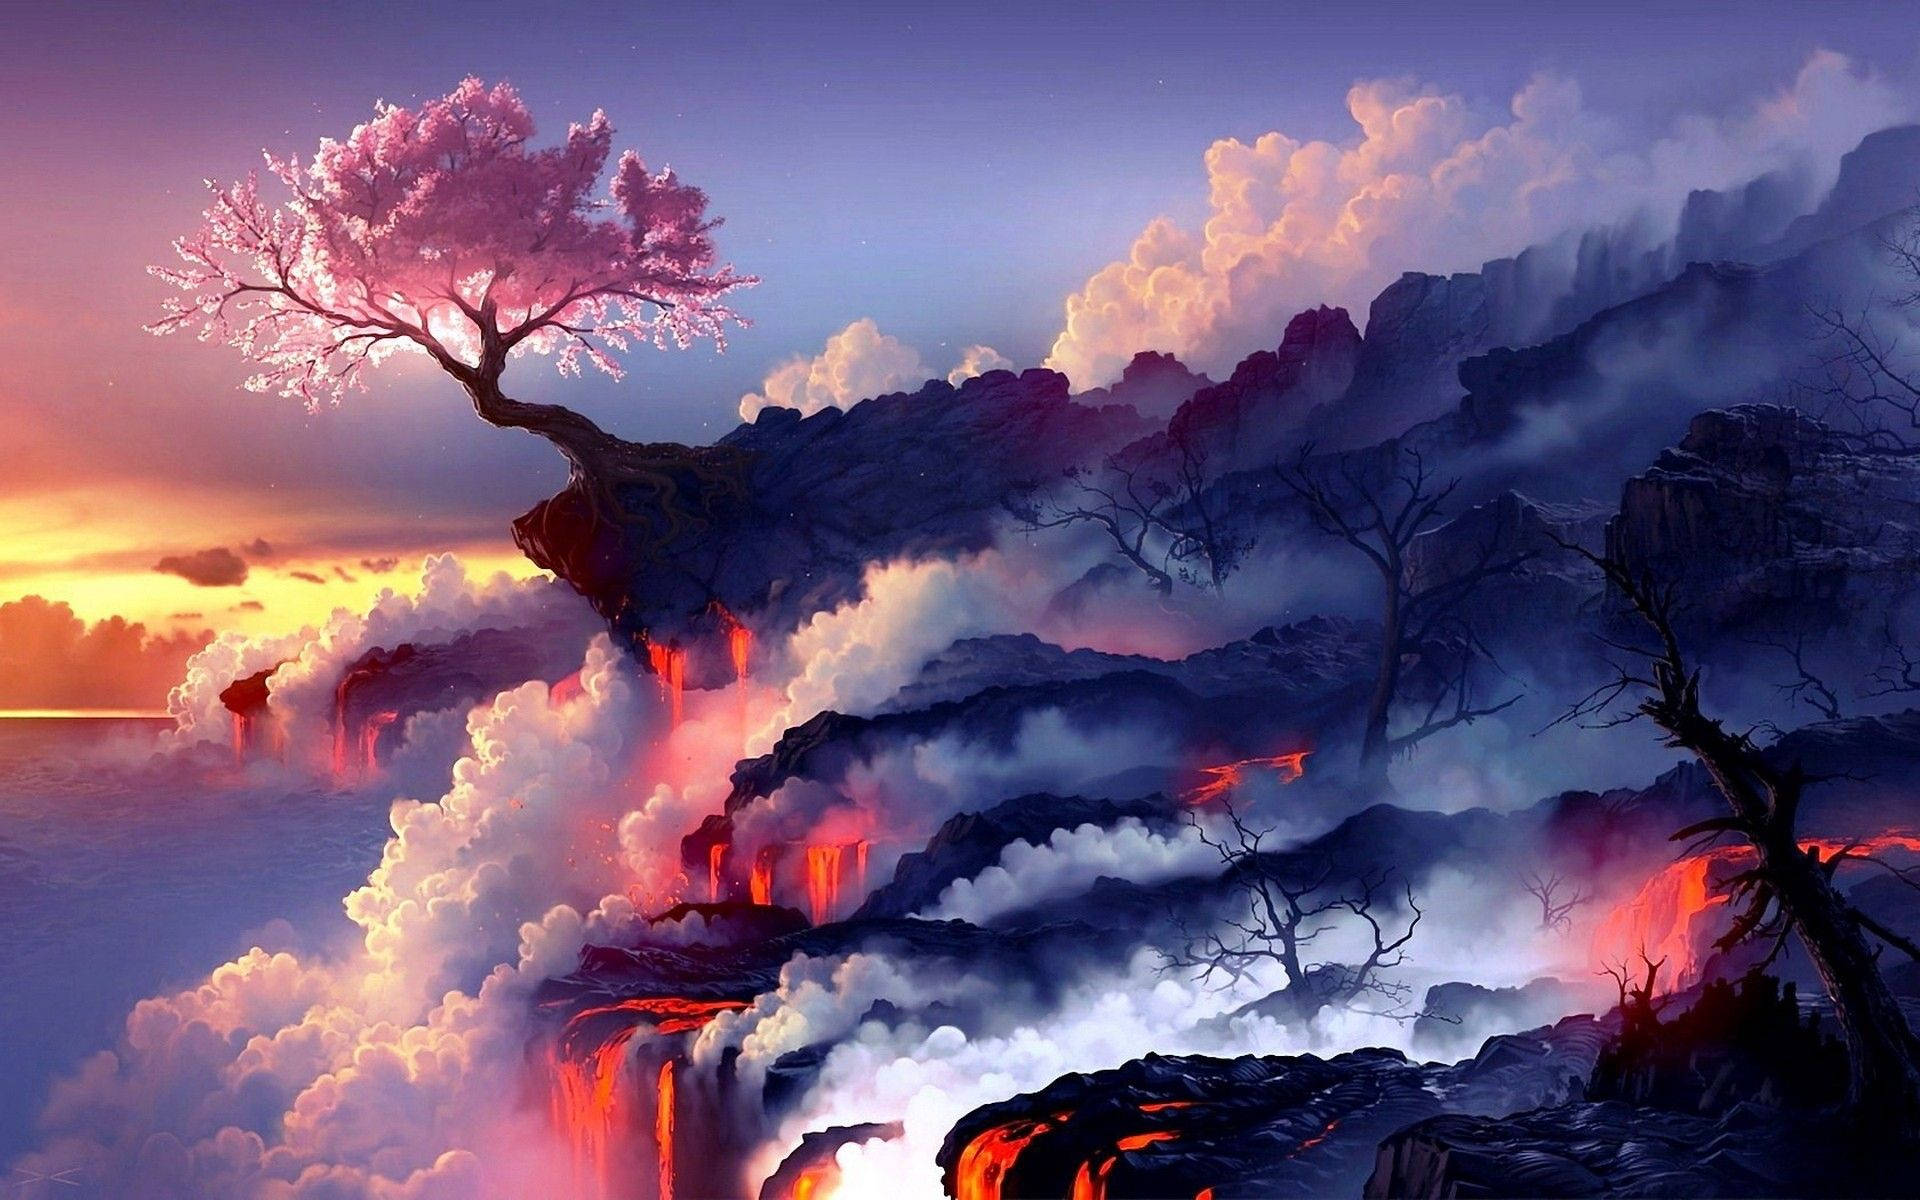 A painting of the sunset over an ocean with lava - Cherry blossom